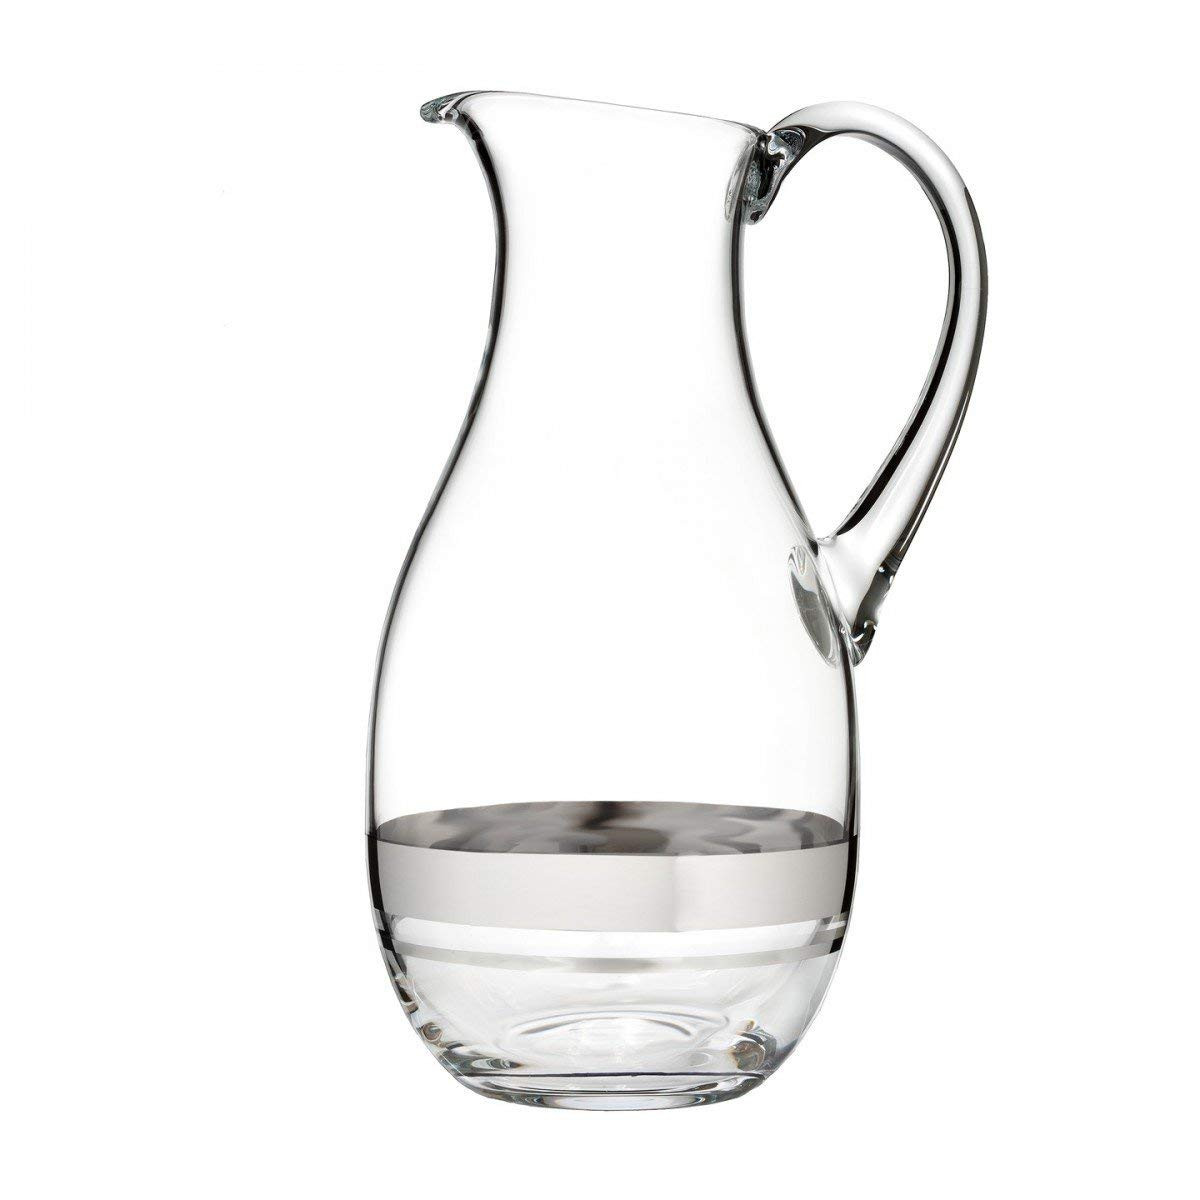 15 attractive Waterford Crystal Lismore Vase 8 2024 free download waterford crystal lismore vase 8 of amazon com elegance pitcher carafes pitchers pertaining to 614s1vvffpl sl1200